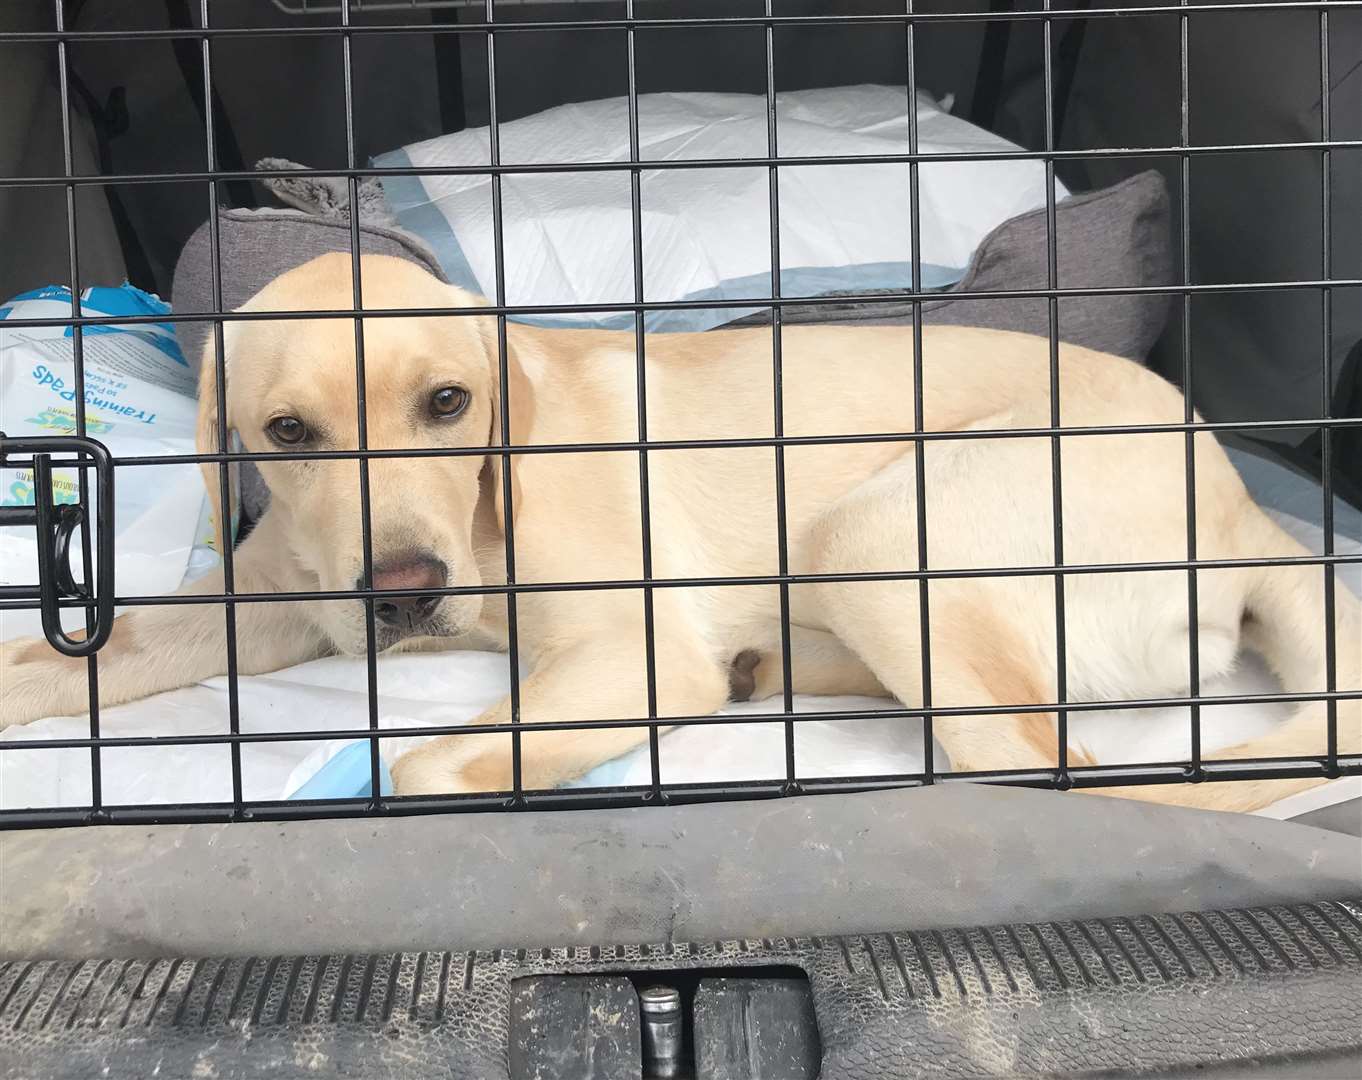 Chester fell ill after contracting Leptospirosis. Photo: Labrador Rescue Kent